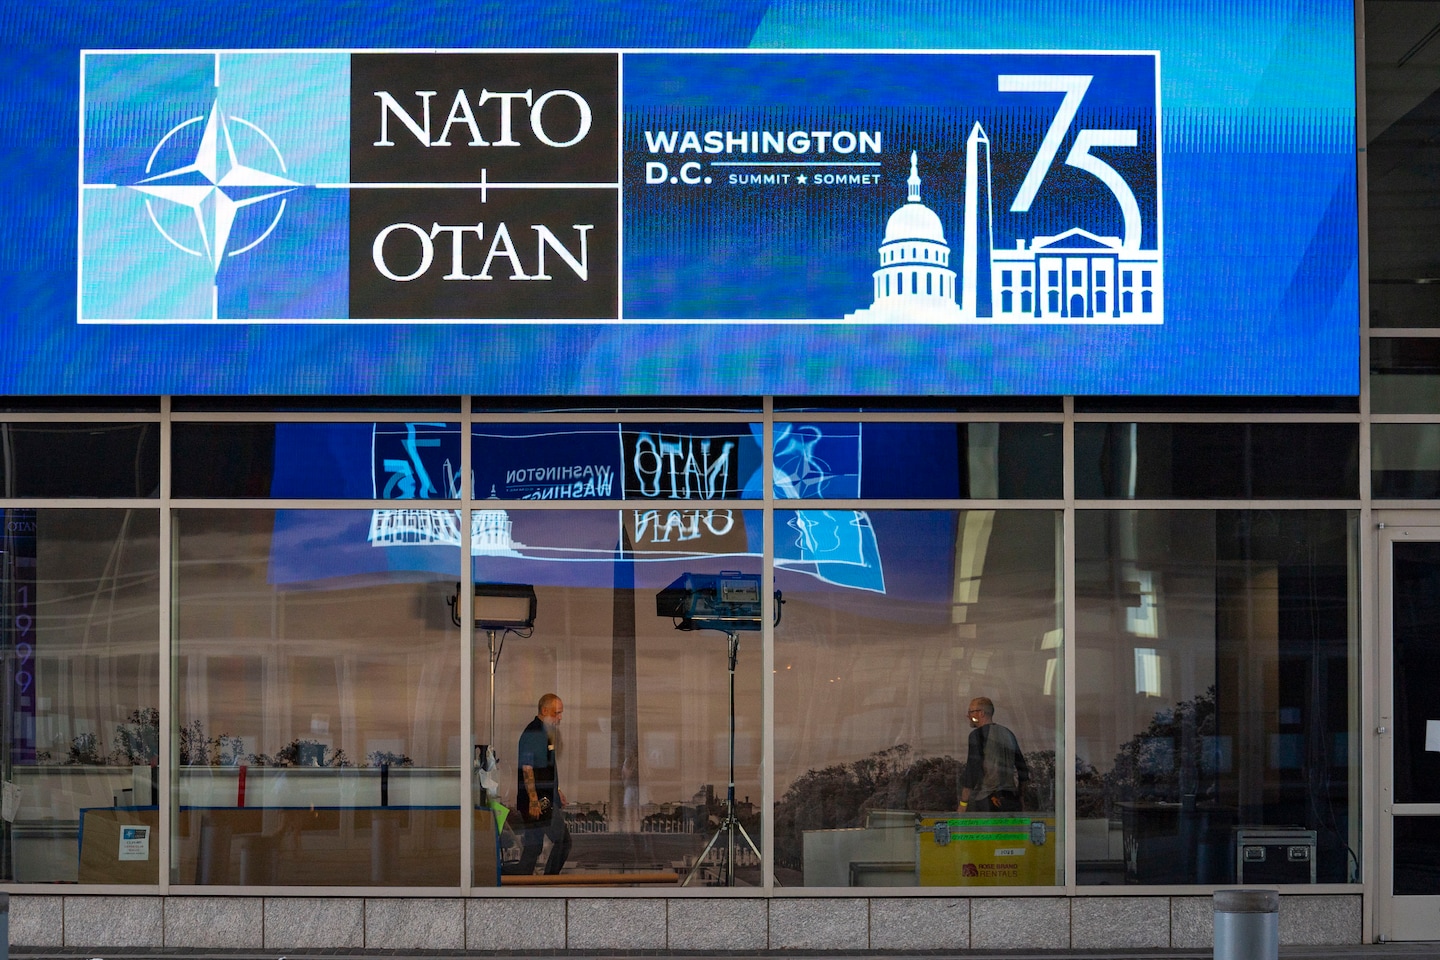 At NATO summit, Ukraine is the focus and Gaza is the elephant in the room